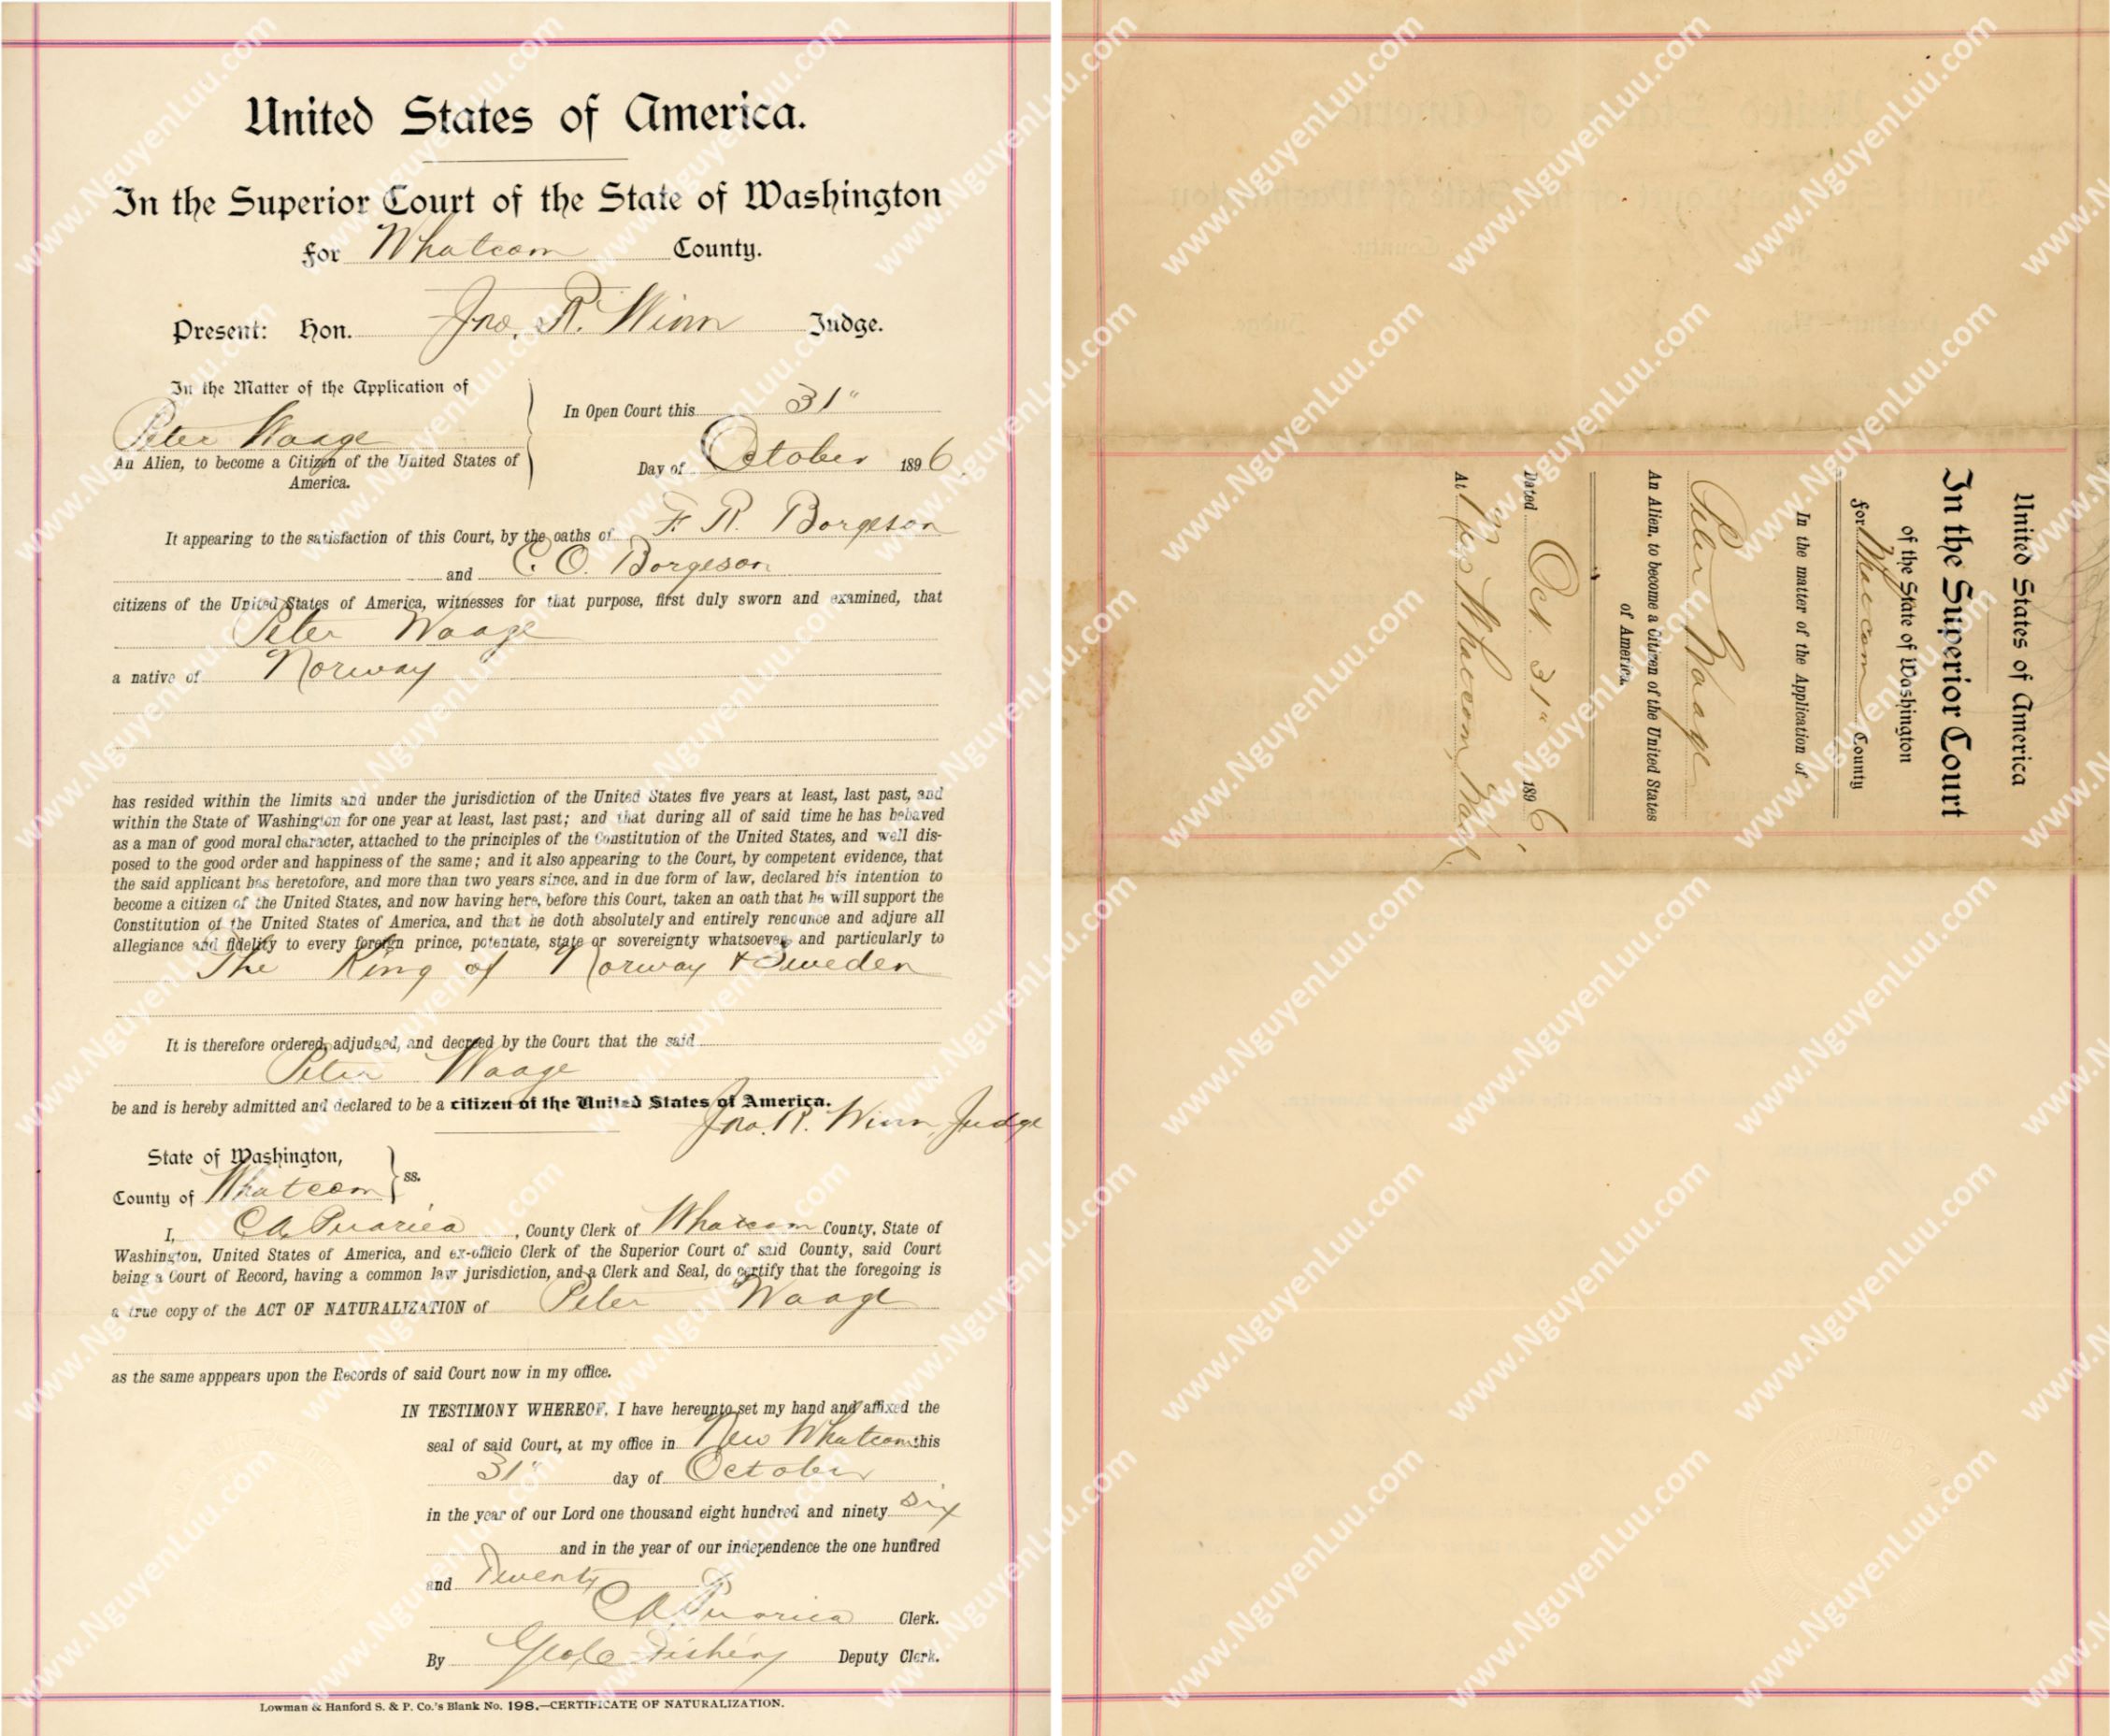 U.S. Certificate of Citizenship issued in the State of Washington in 1896